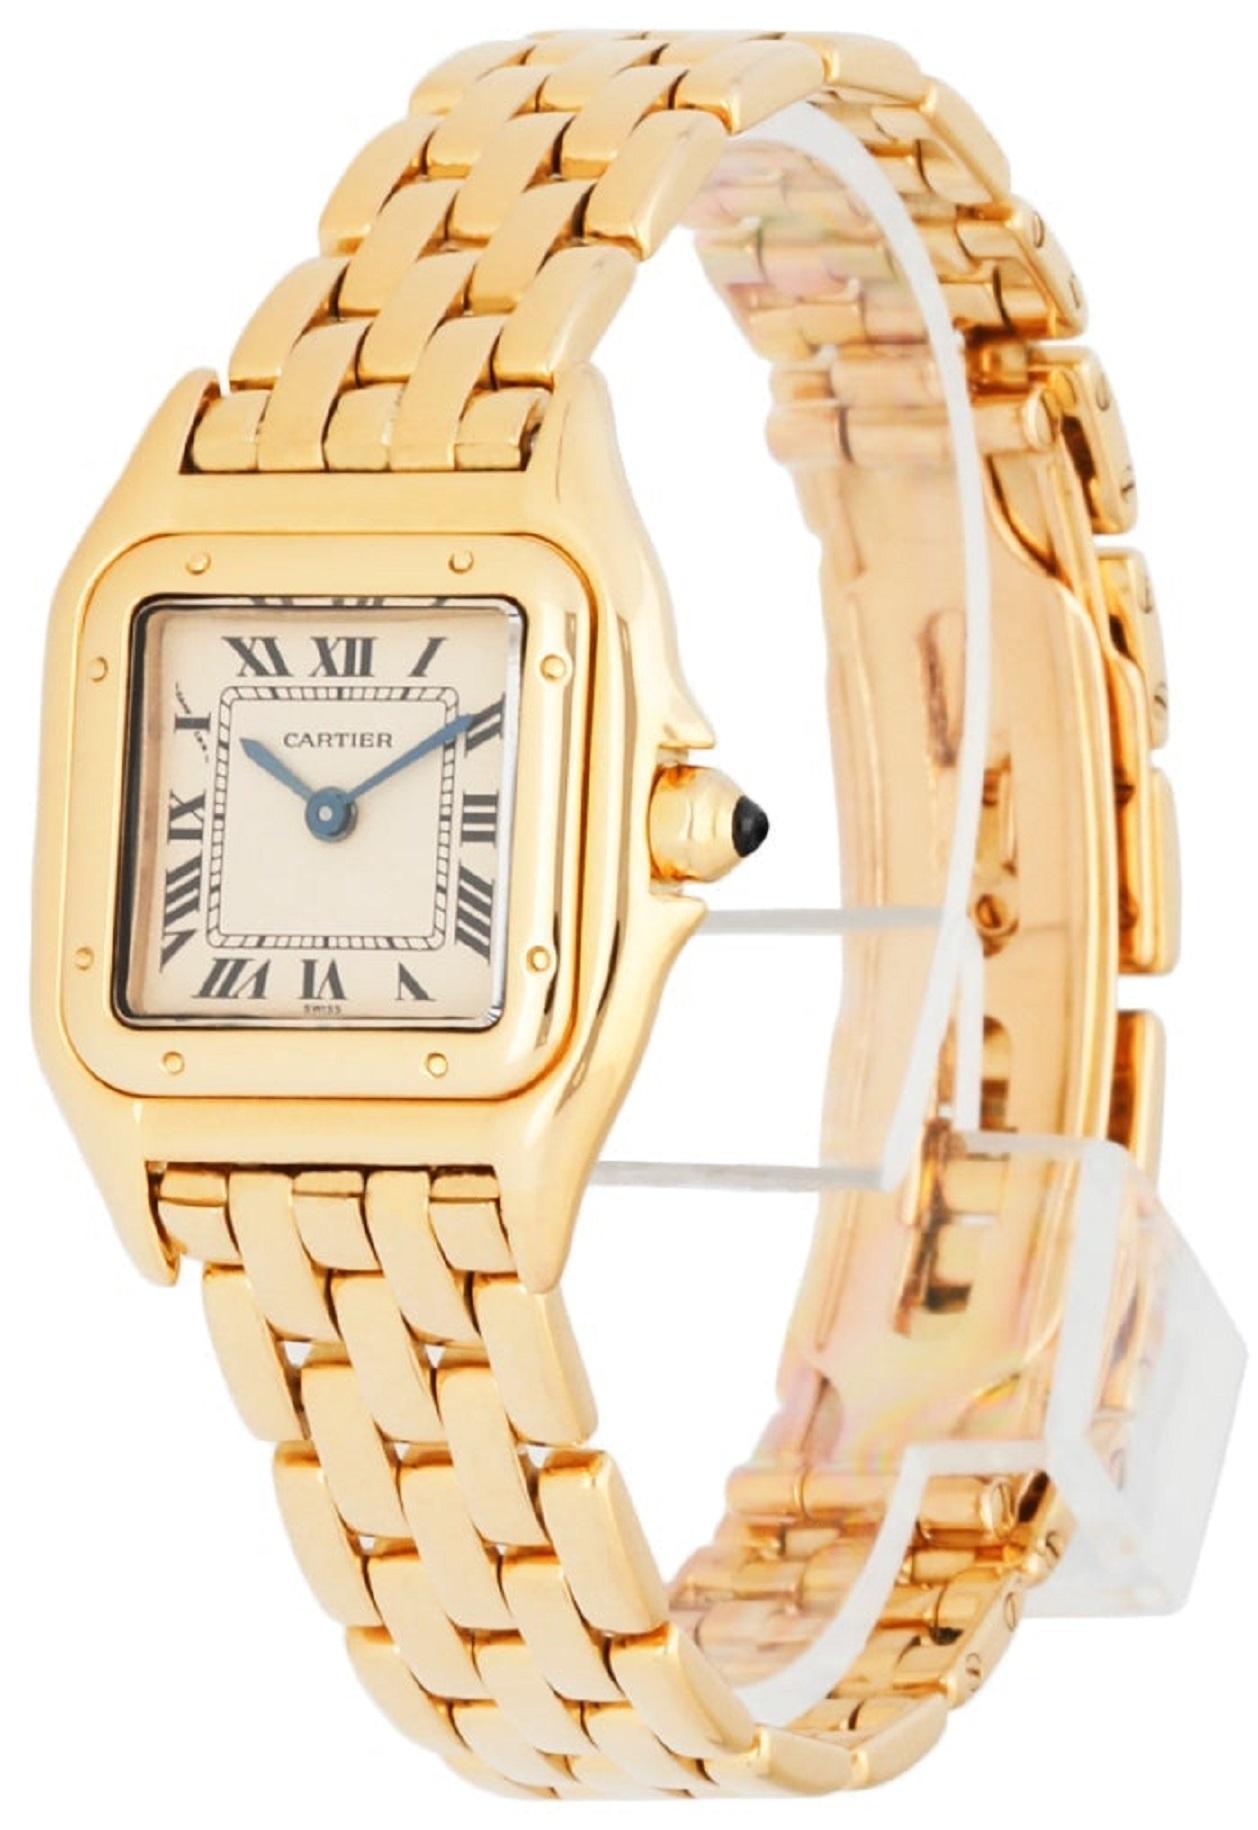 Cartier Panthere 1070 Ladies Watch. 22mm 18k Yellow gold case. 18K Yellow Gold smooth bezel. Off-White dial with Blue steel hands and Roman numeral hour markers. Minute markers on the inner dial. 18K Yellow Gold Bracelet with hidden Butterfly Clasp.